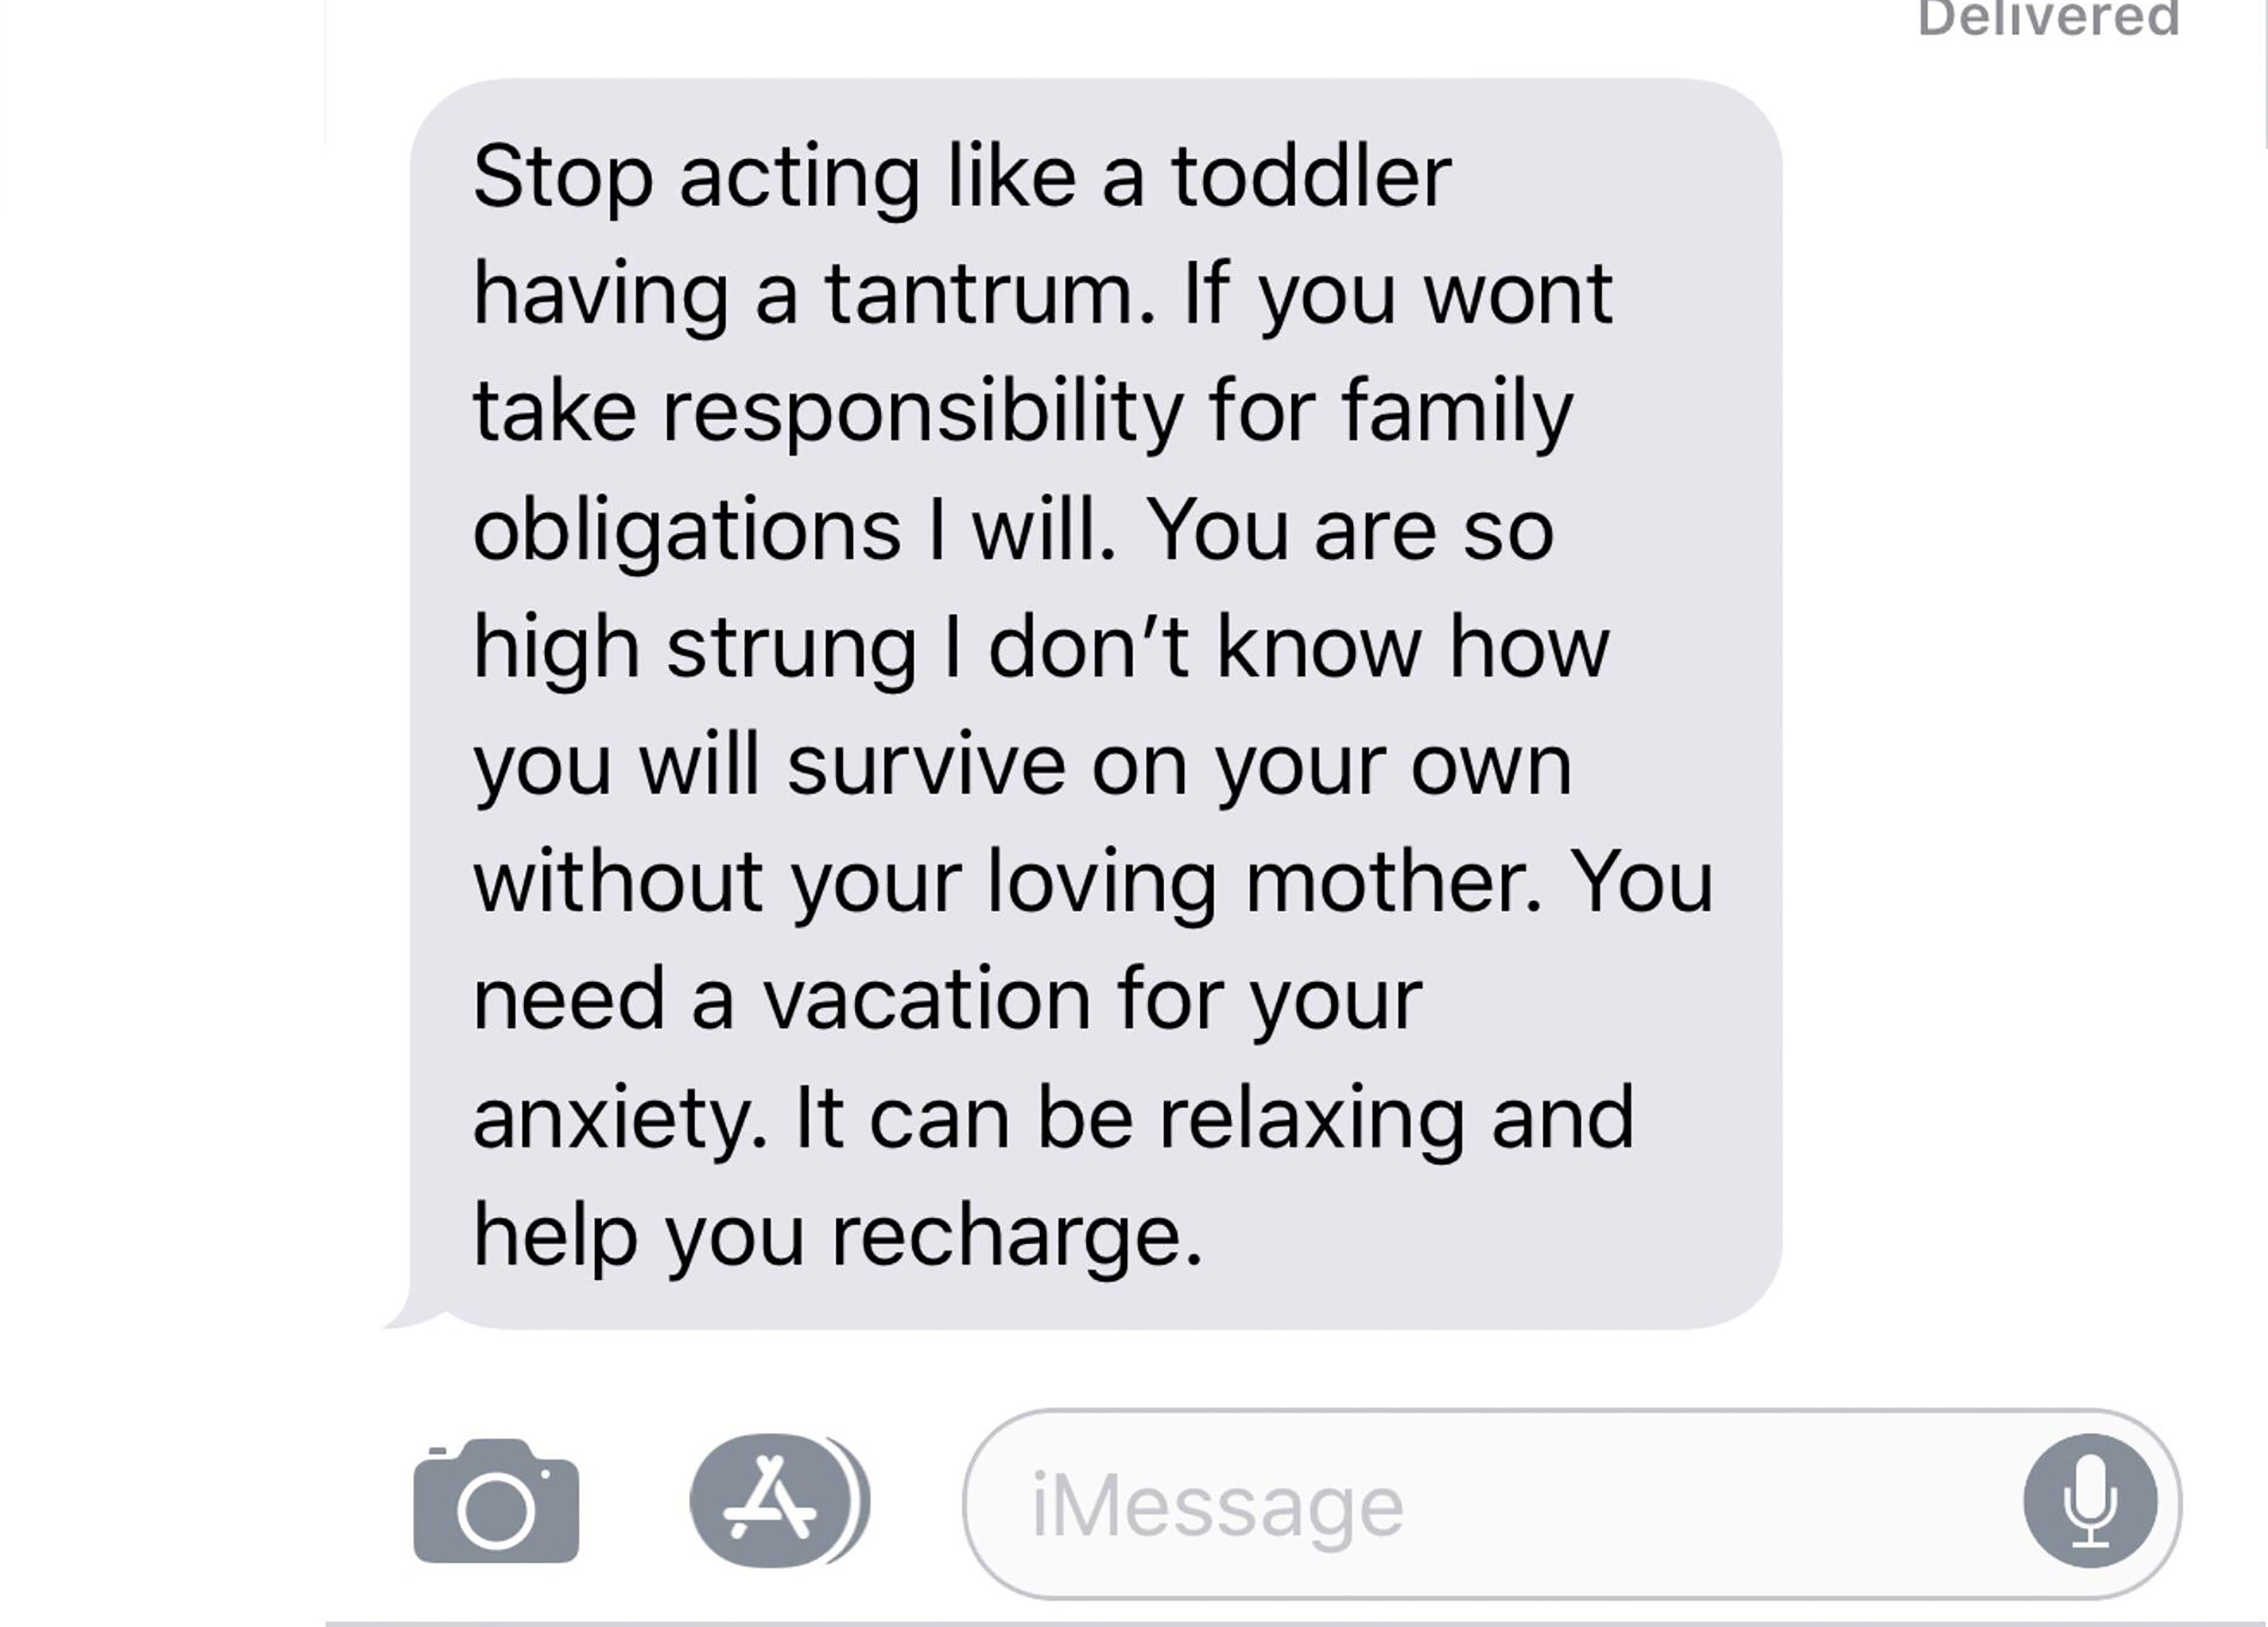 number - Delivered Stop acting a toddler having a tantrum. If you wont take responsibility for family obligations I will. You are so high strung I don't know how you will survive on your own without your loving mother. You need a vacation for your anxiety